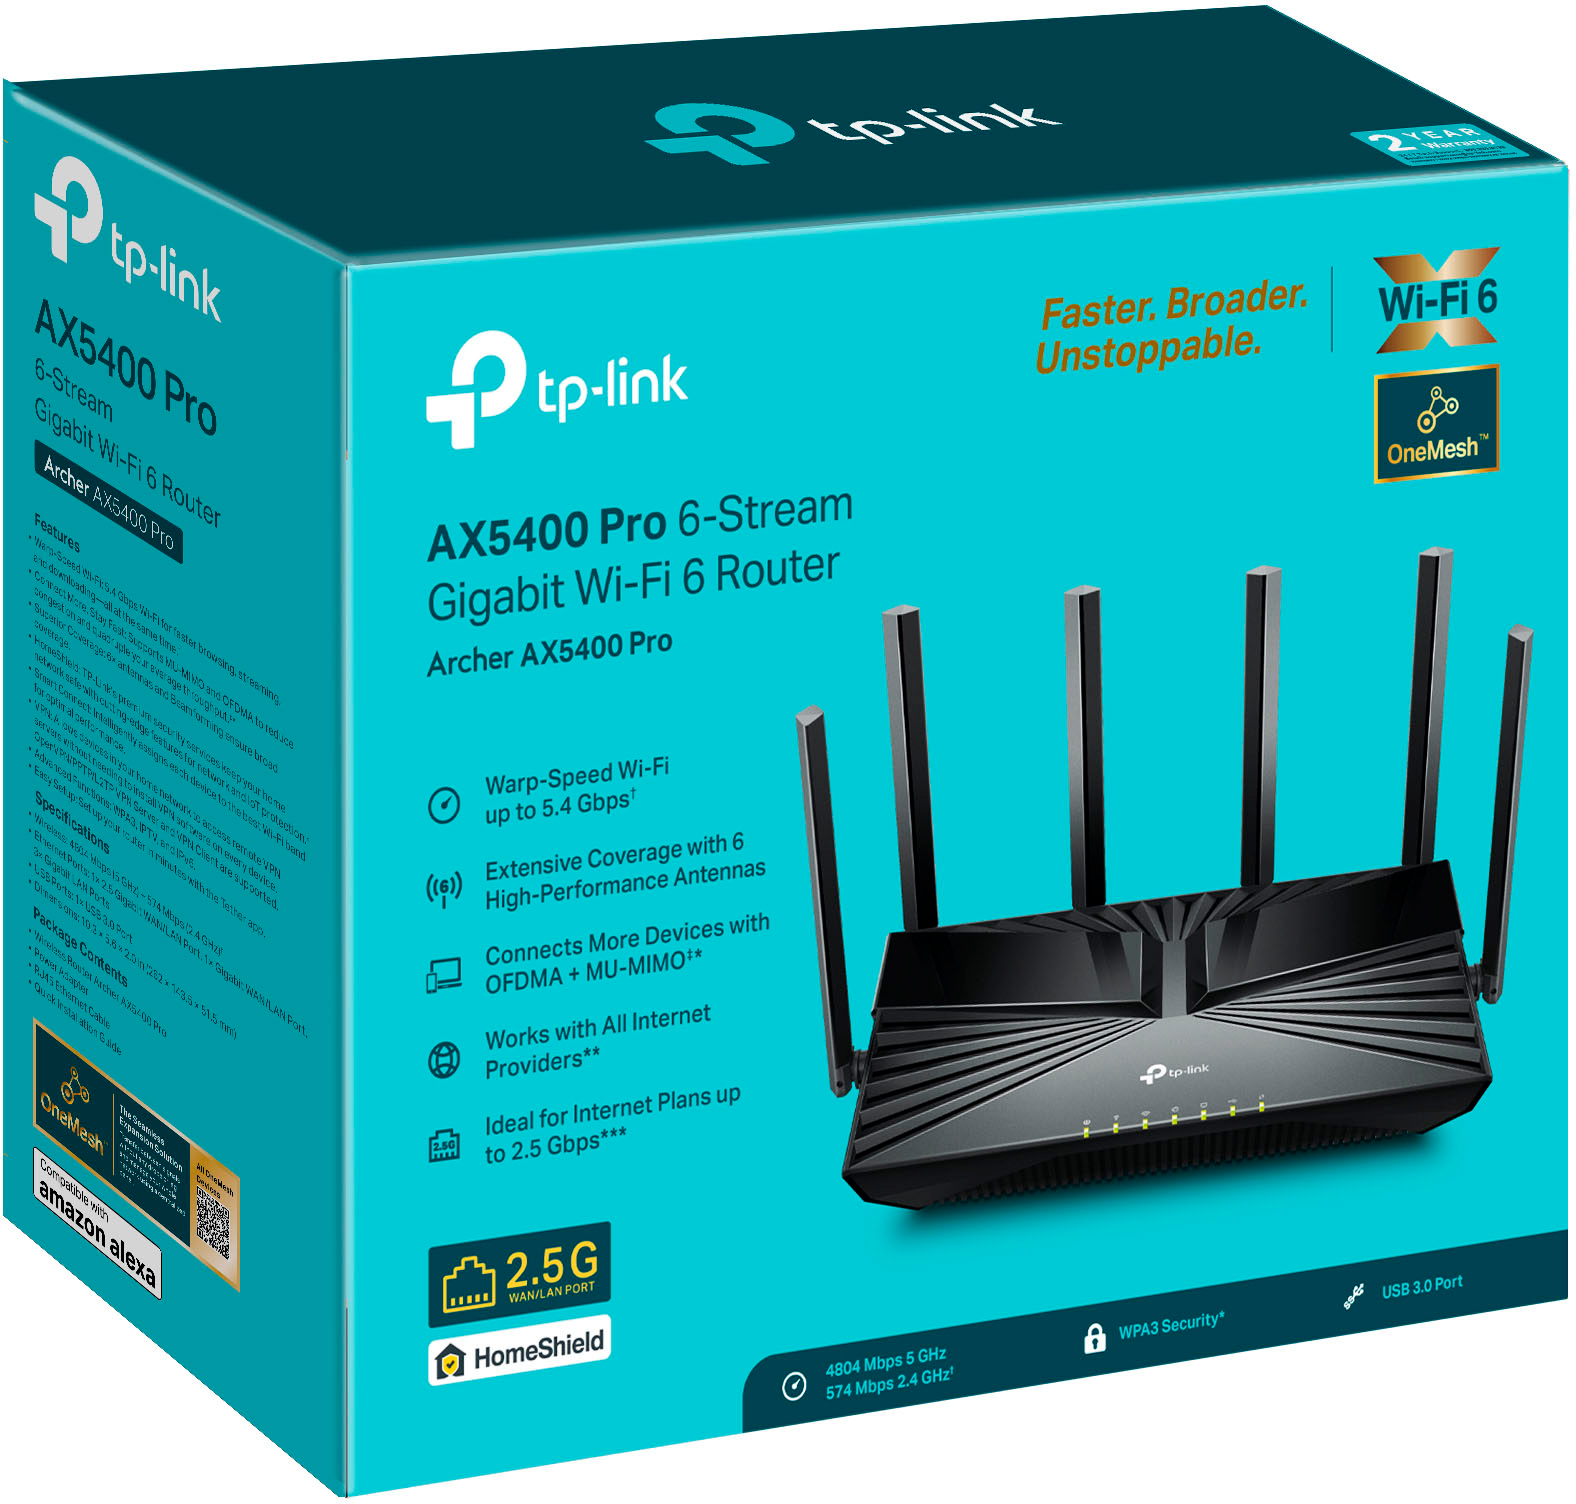 Router Ethernet Wi-Fi 6 TP-Link Archer AX10 1500 Mbps Dual-Band 2.4GHz 